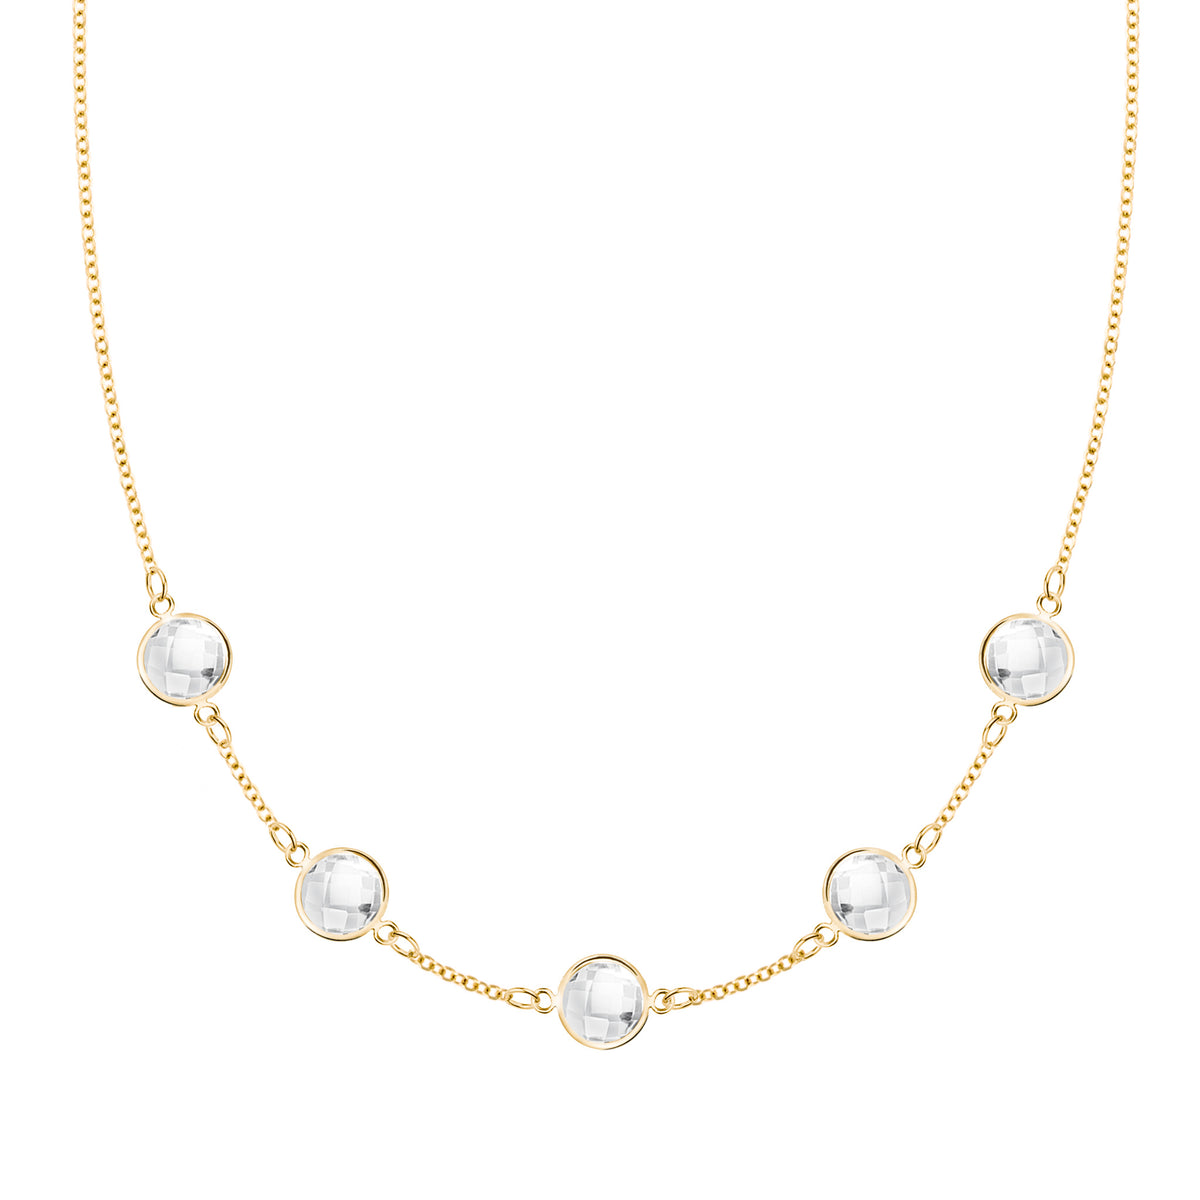 The Birthstone Necklace: 5 Reasons to Get One Right Now